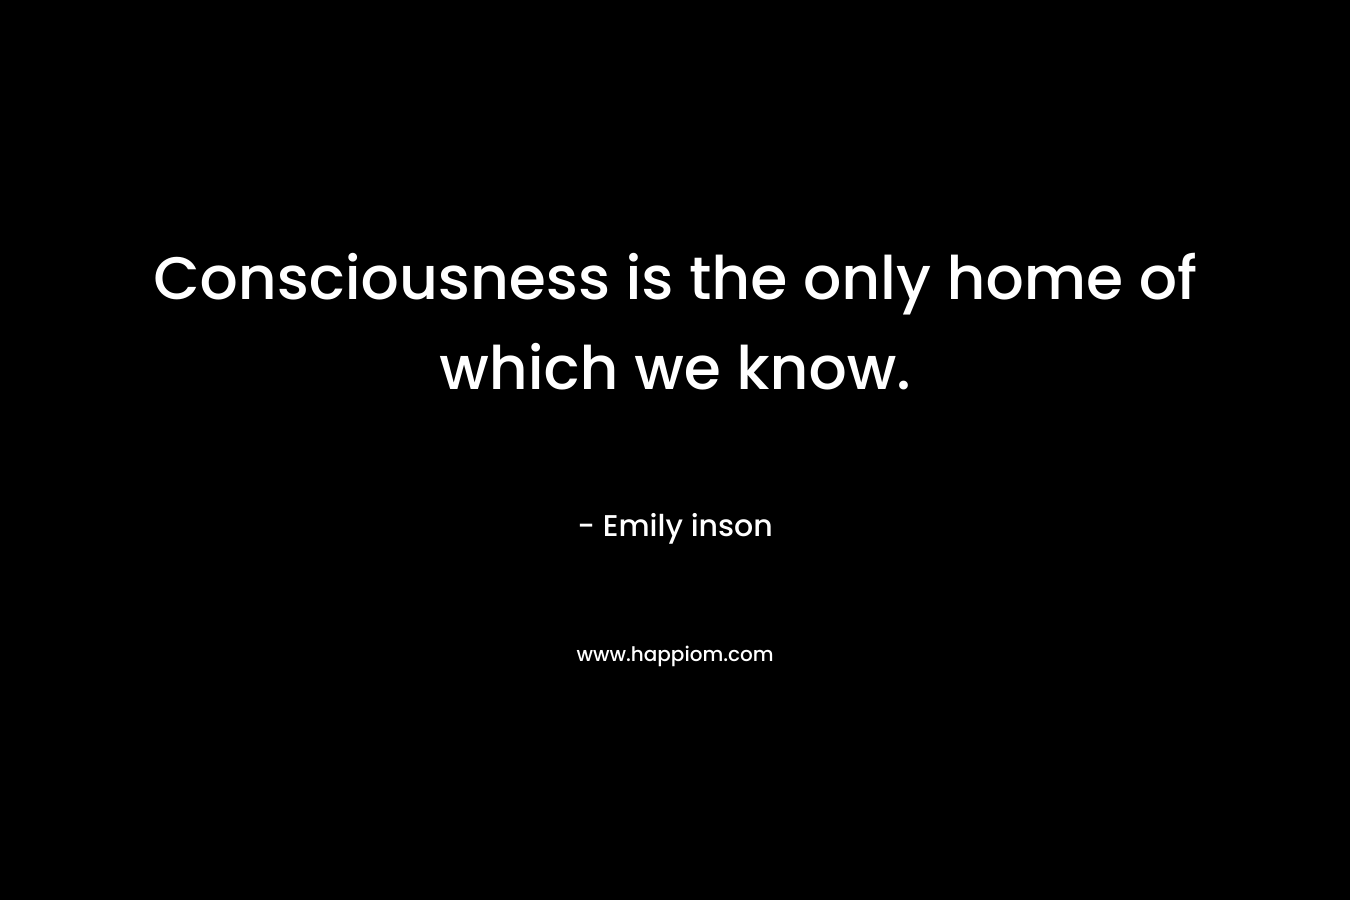 Consciousness is the only home of which we know.